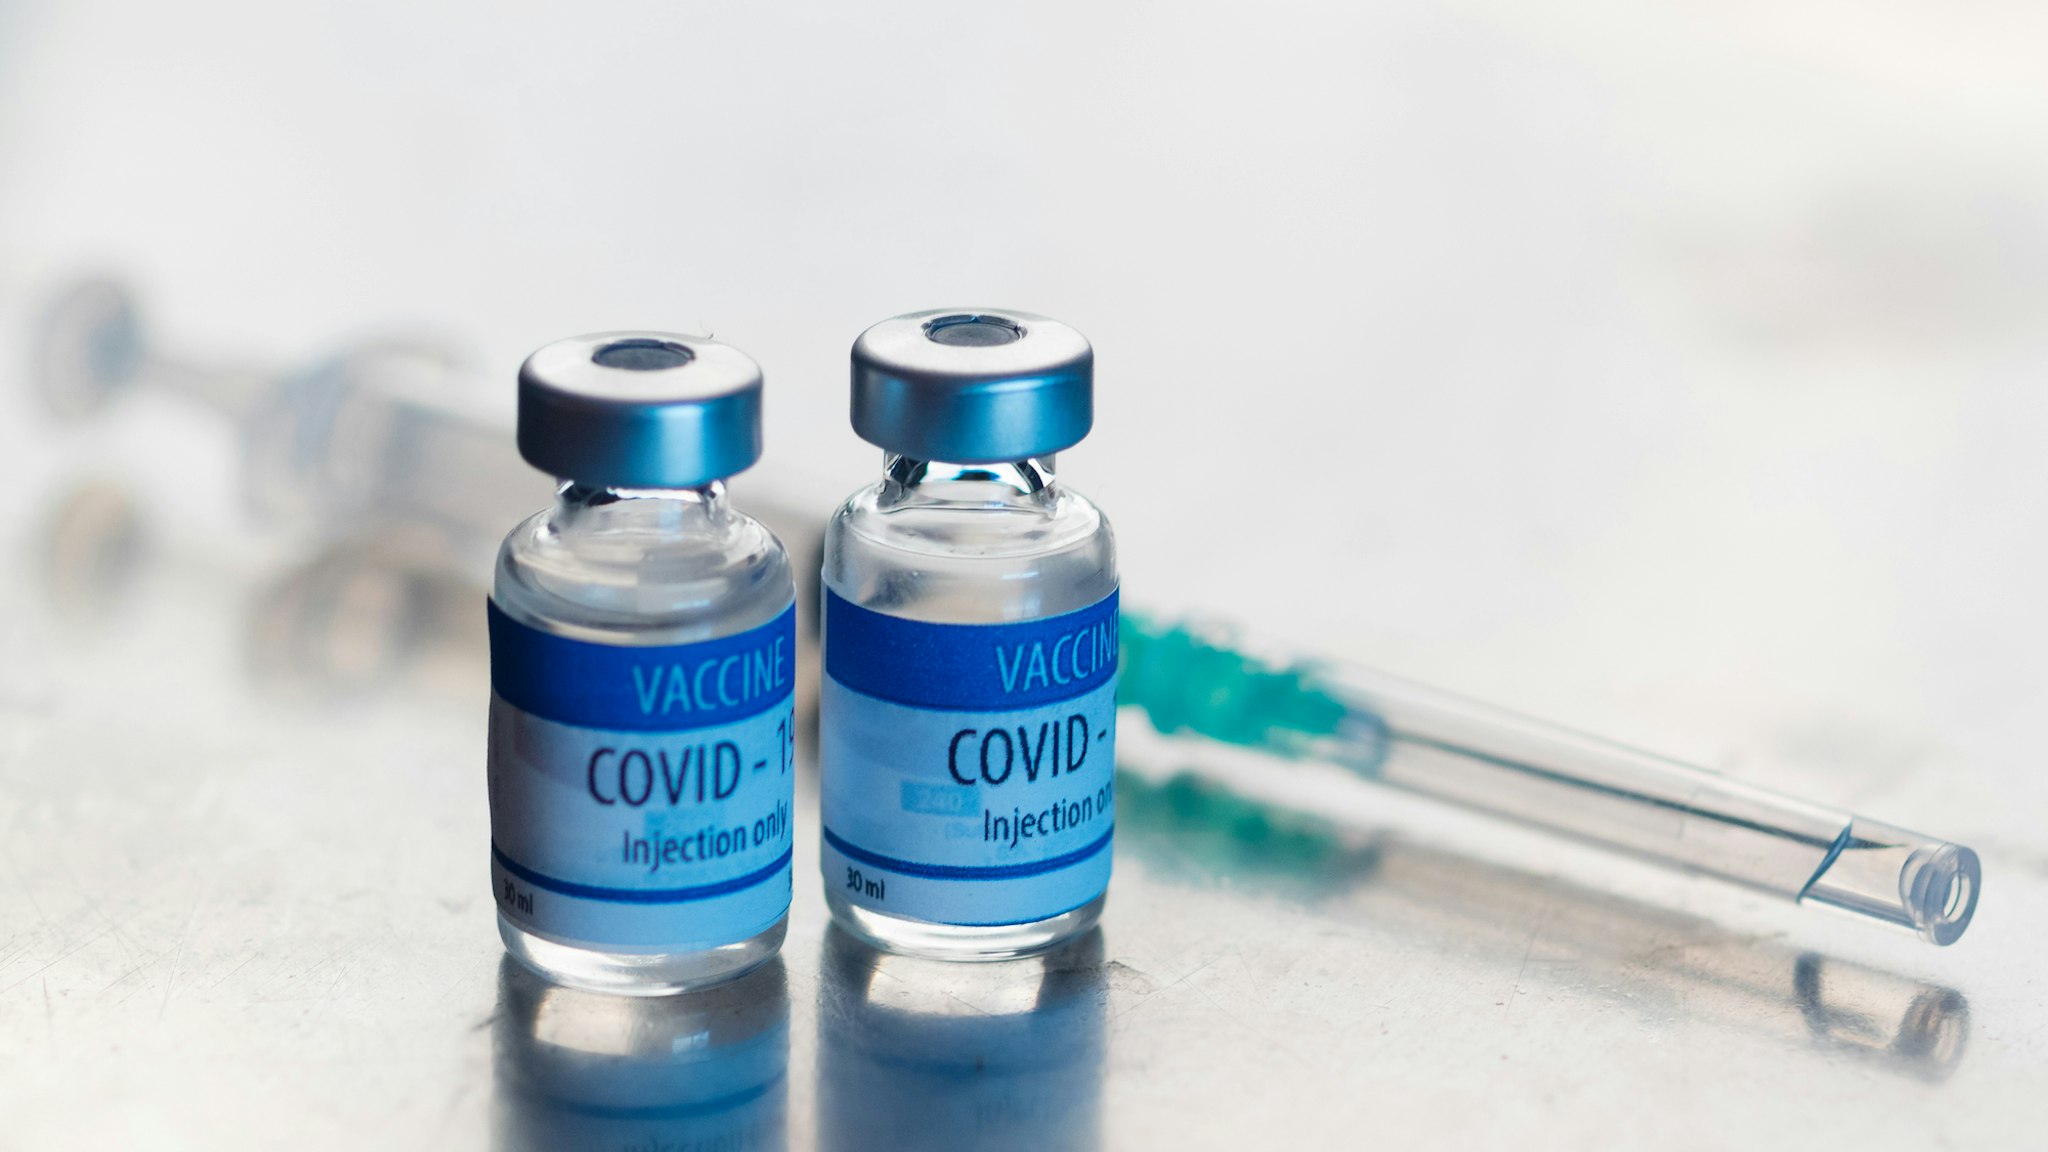 Ready-to-inject vials of Covid-19 vaccine - stock photo